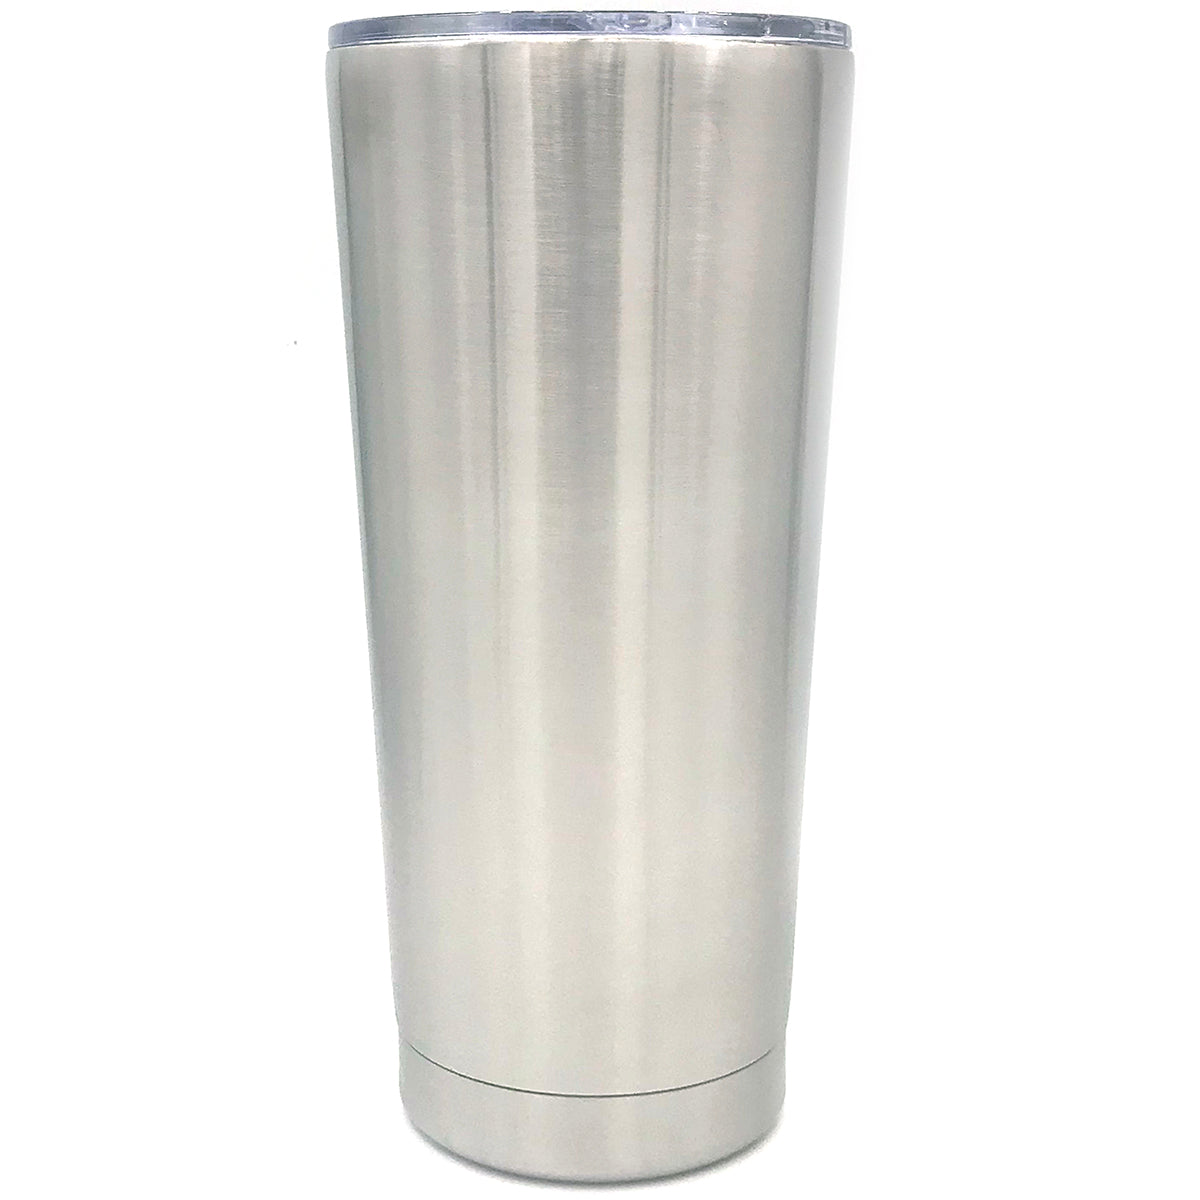 Sliner 4 Pcs 20oz Stainless Steel Tumbler with Lid and Straw Skinny Tumbler  Double Insulated Travel …See more Sliner 4 Pcs 20oz Stainless Steel